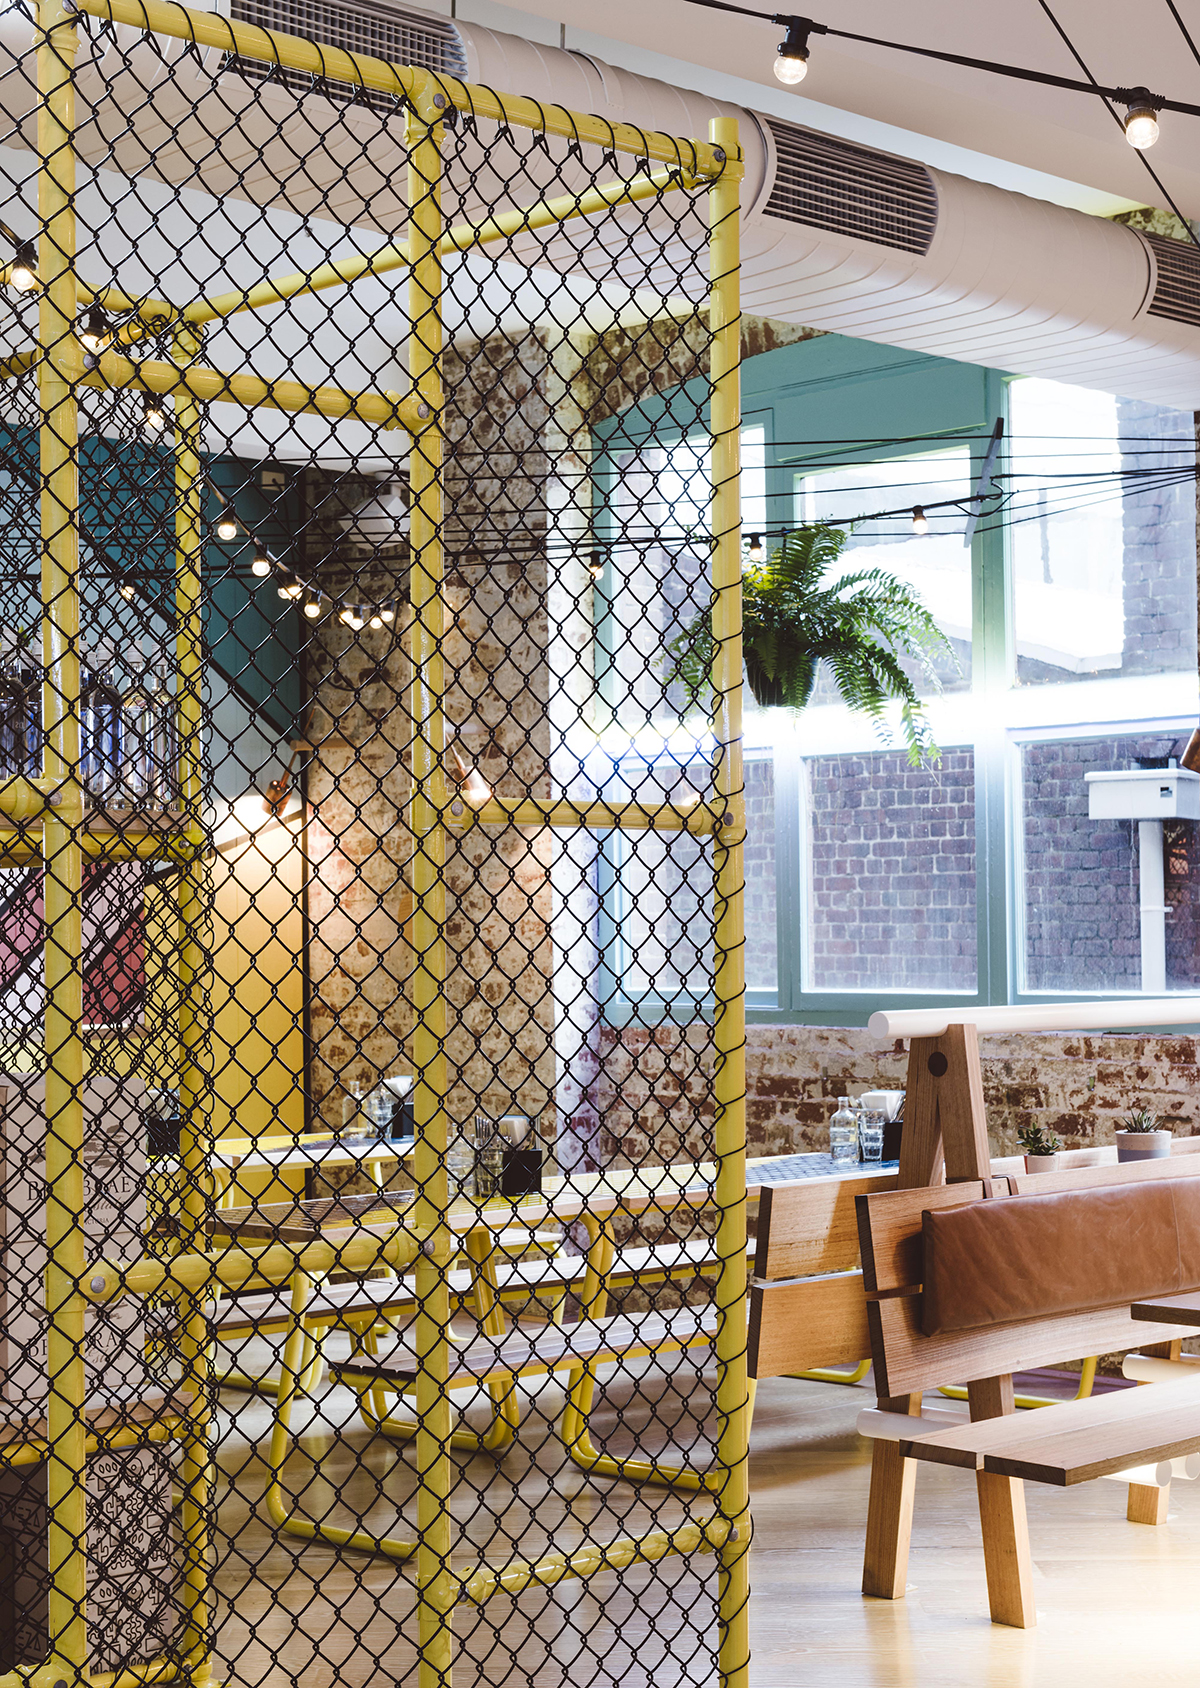  Fonda Mexican Restaurant Melbourne designed by Techne Architects 